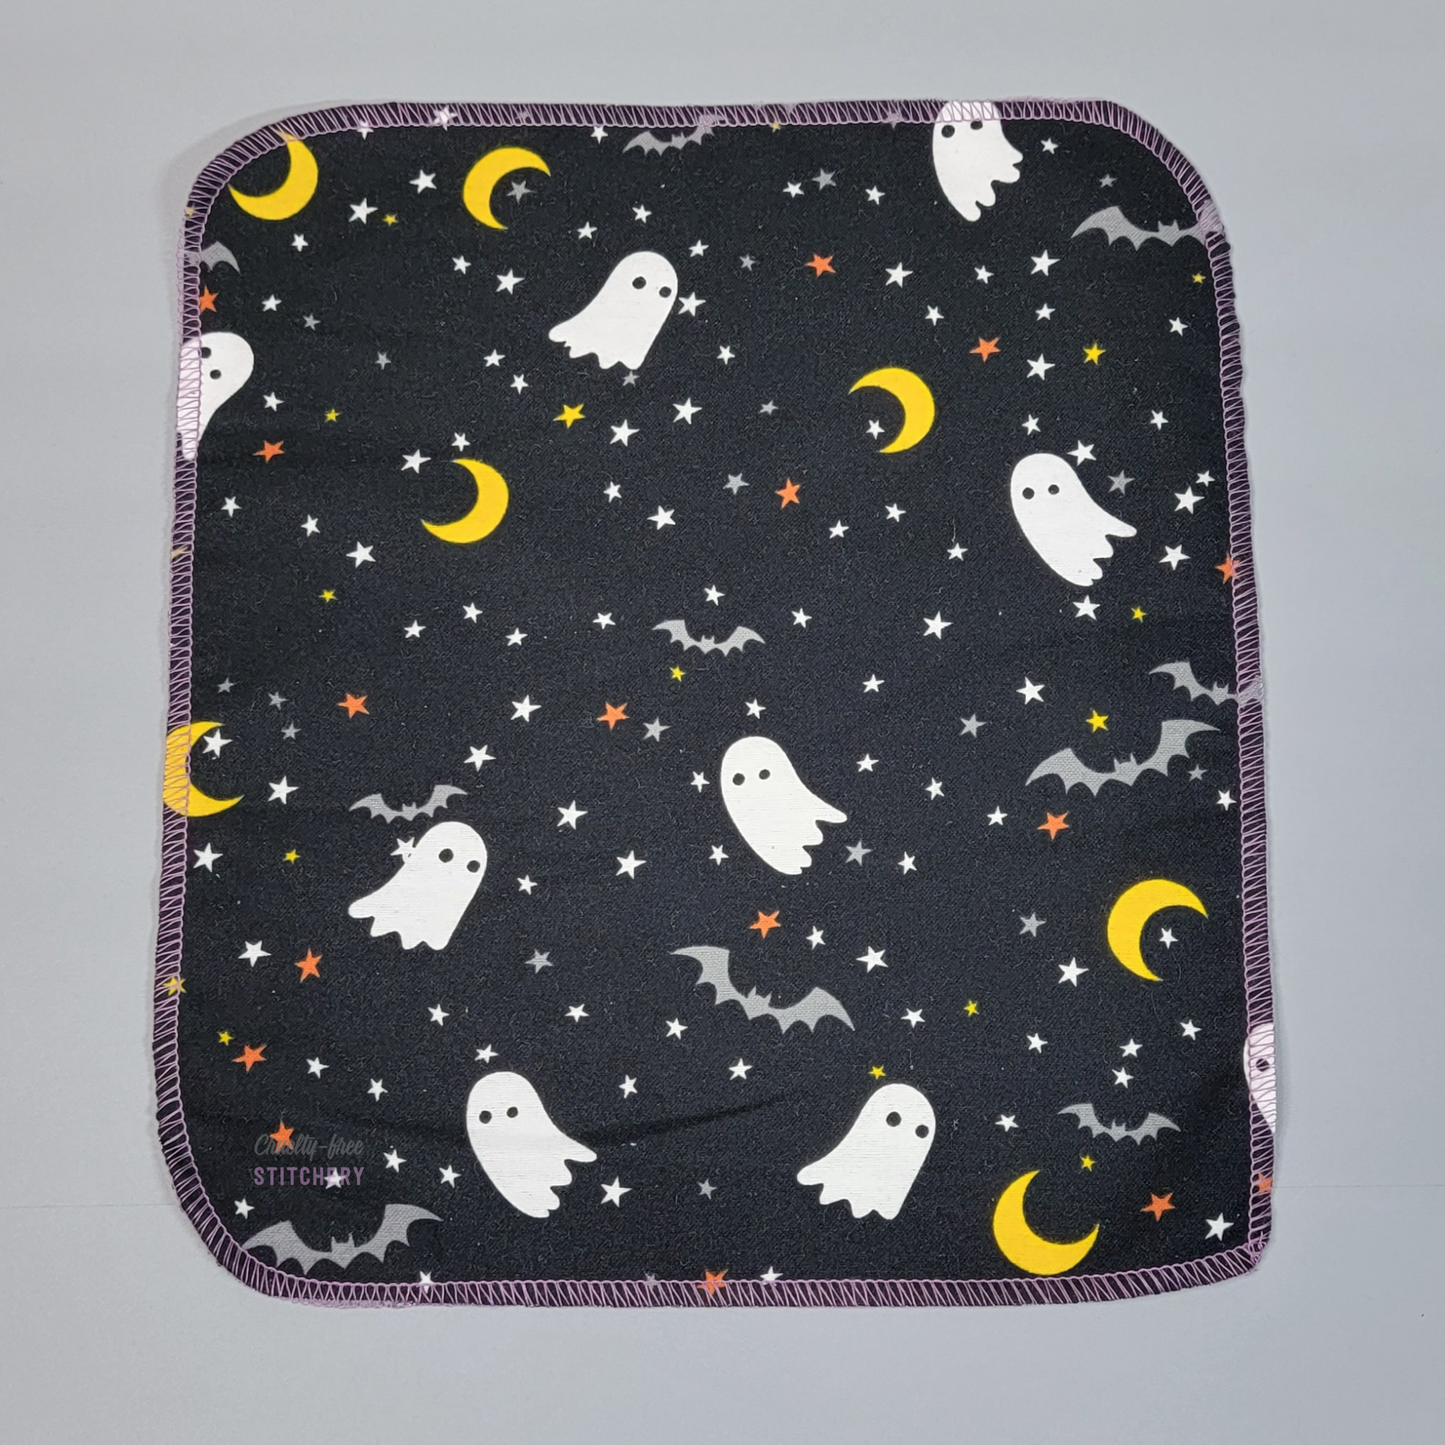 A black NonPaper Towel printed with white ghosts, grey bats, yellow crescent moons, and white and orange stars.